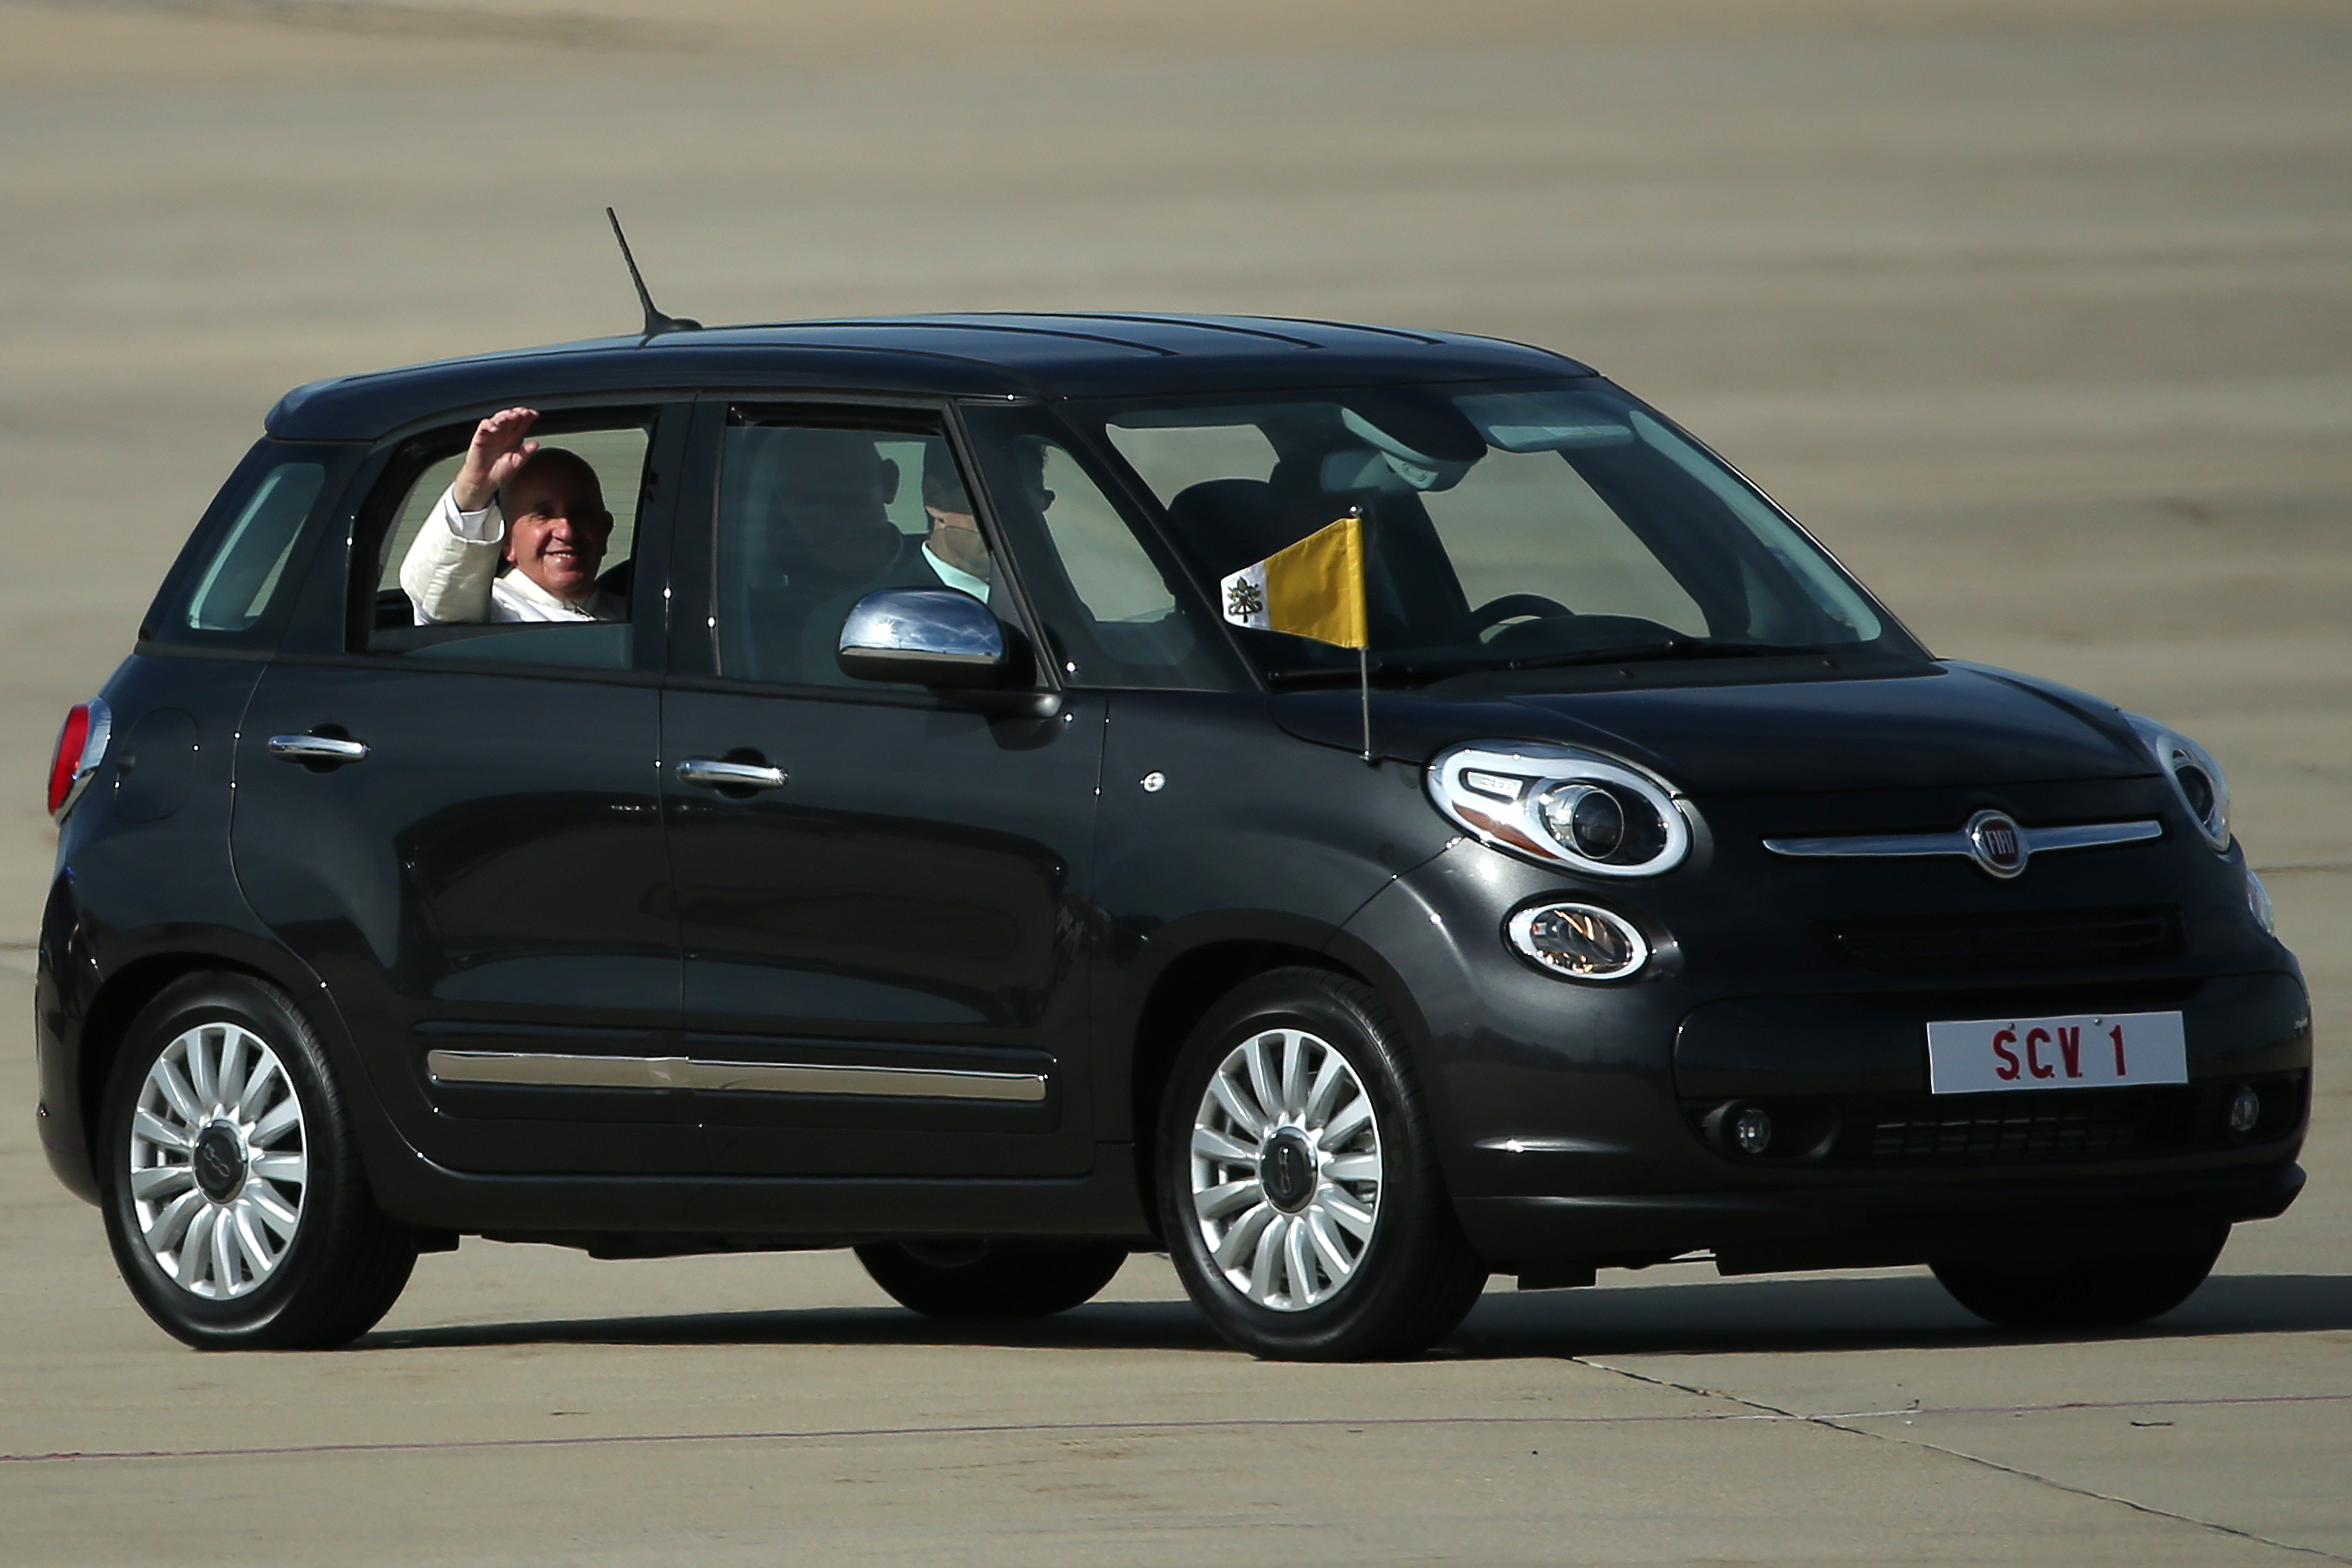  Pope Francis arrives for his departure from Washington, DC en route to New York City in his Fiat. (Photo by Patrick Smith/Getty Images)